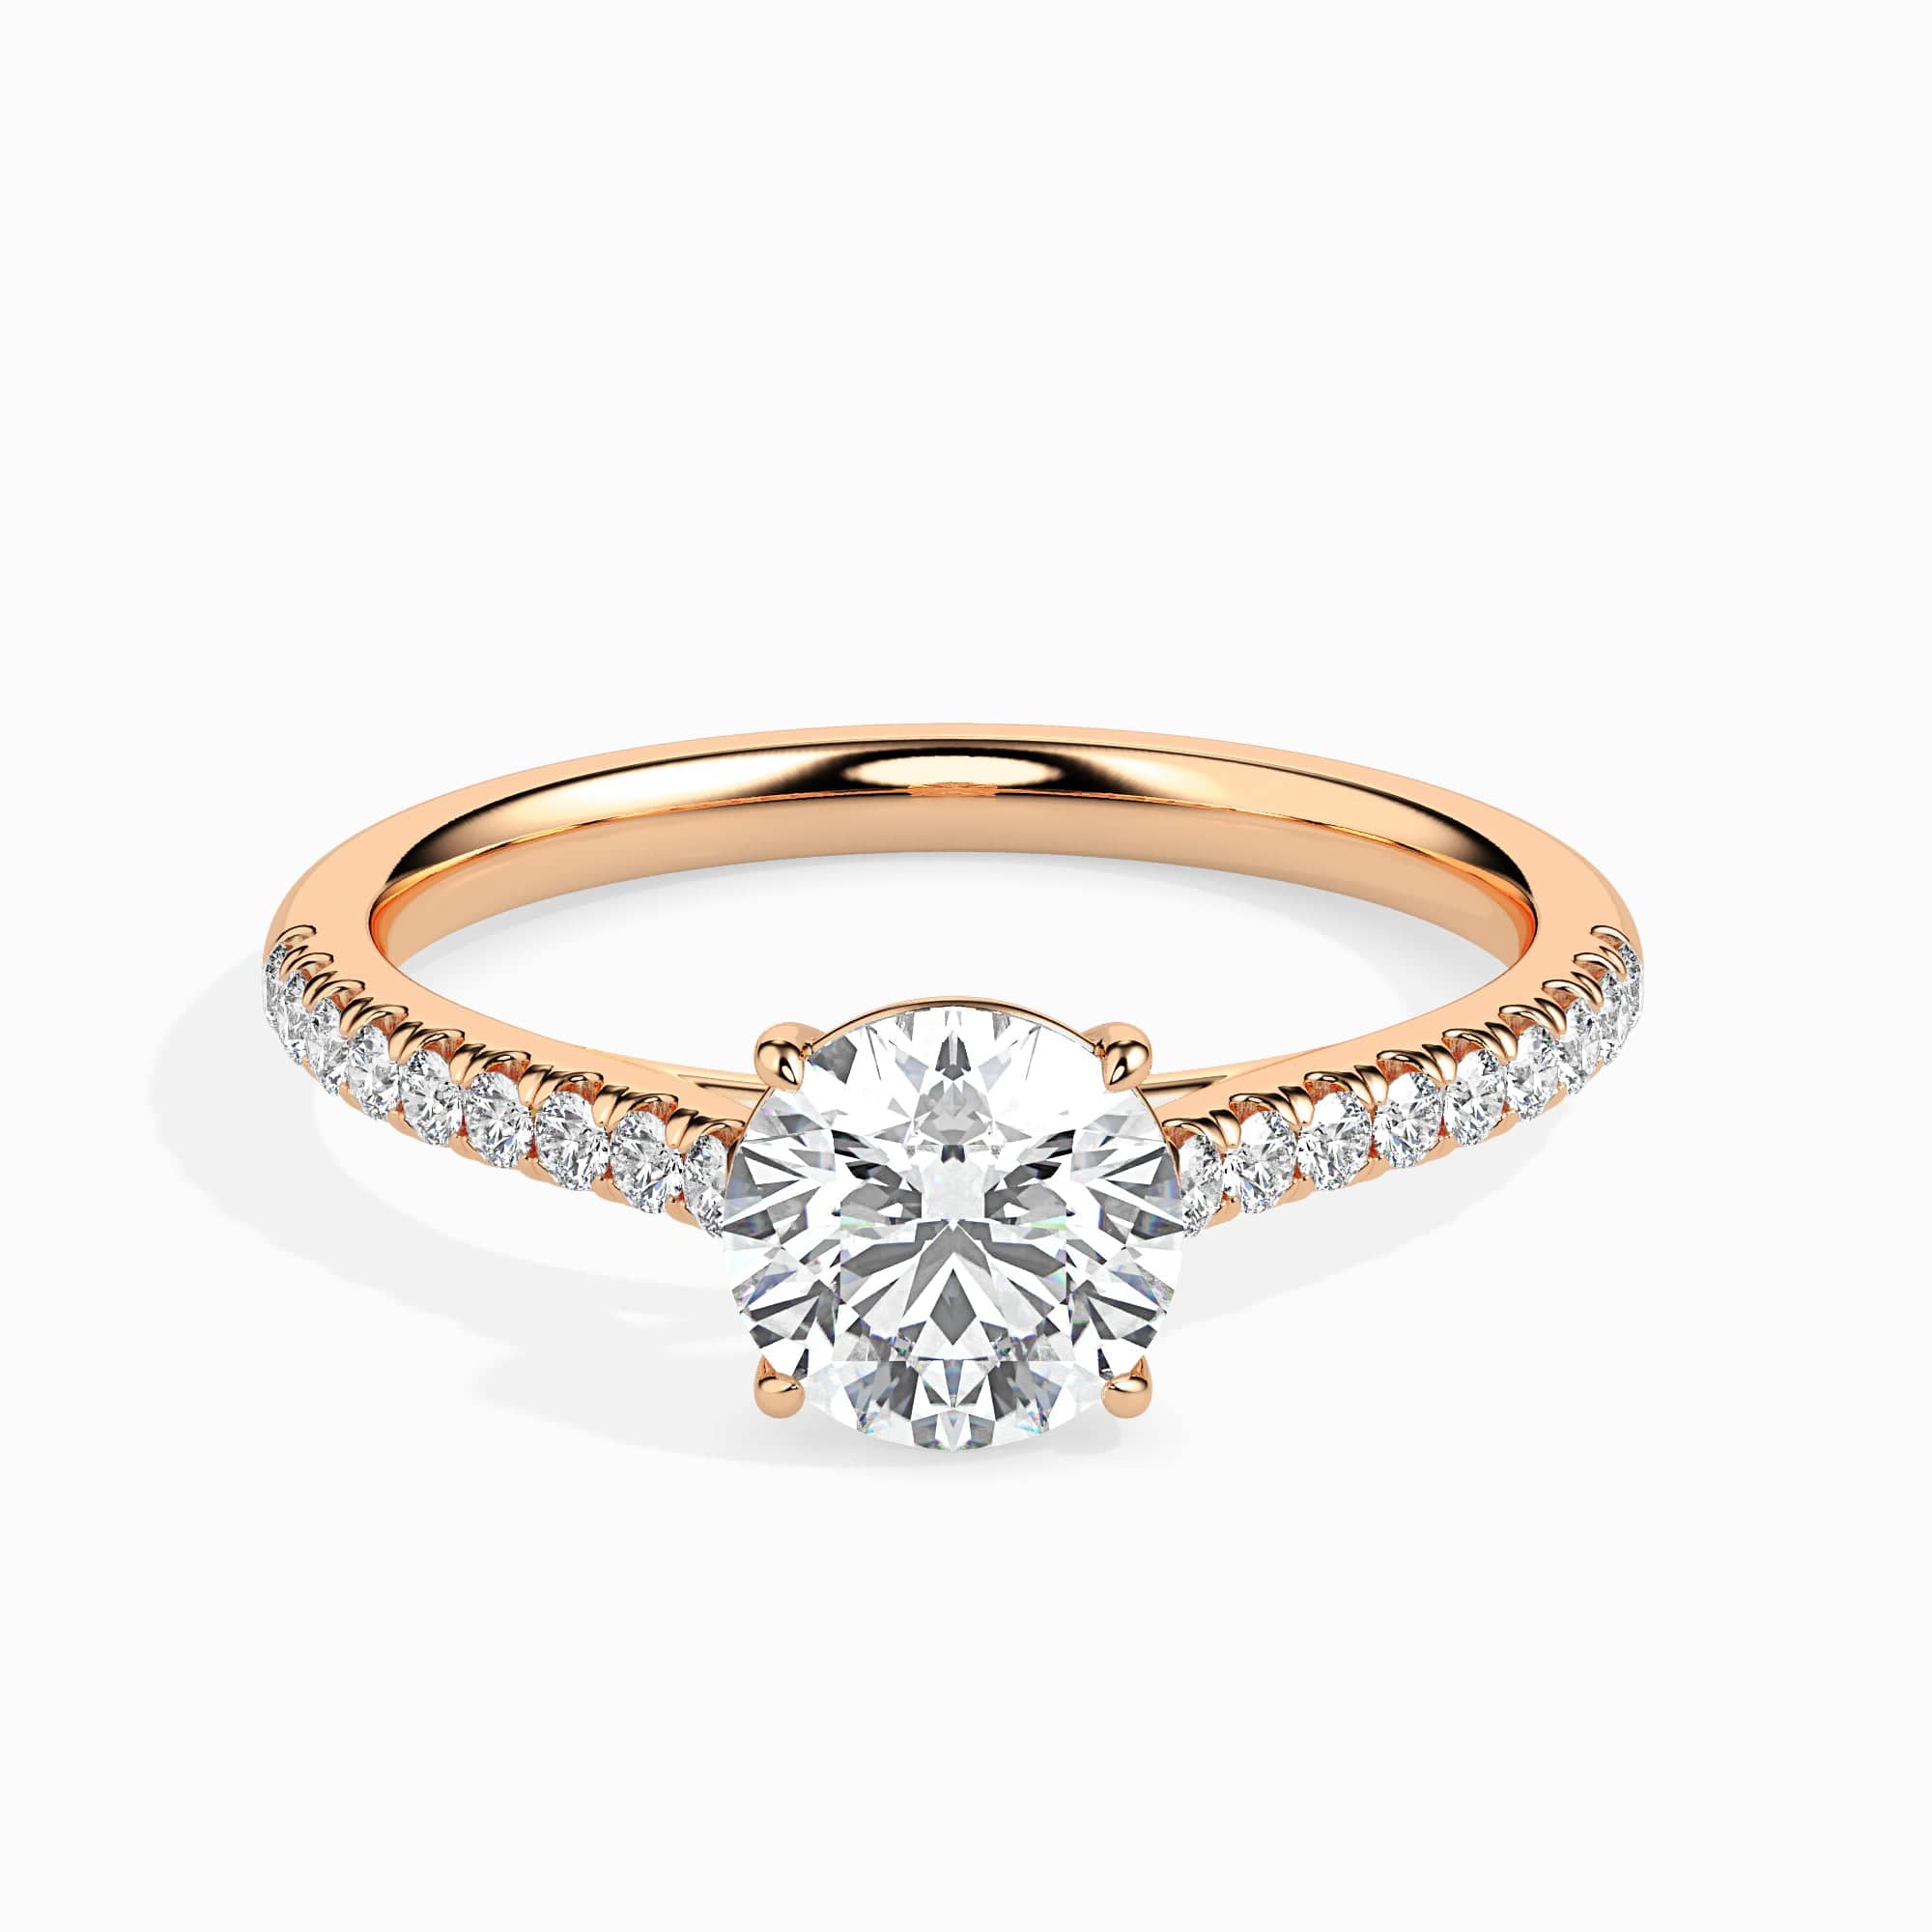 Elegant Solitaire Diamond Rings for Wedding: Latest Collection